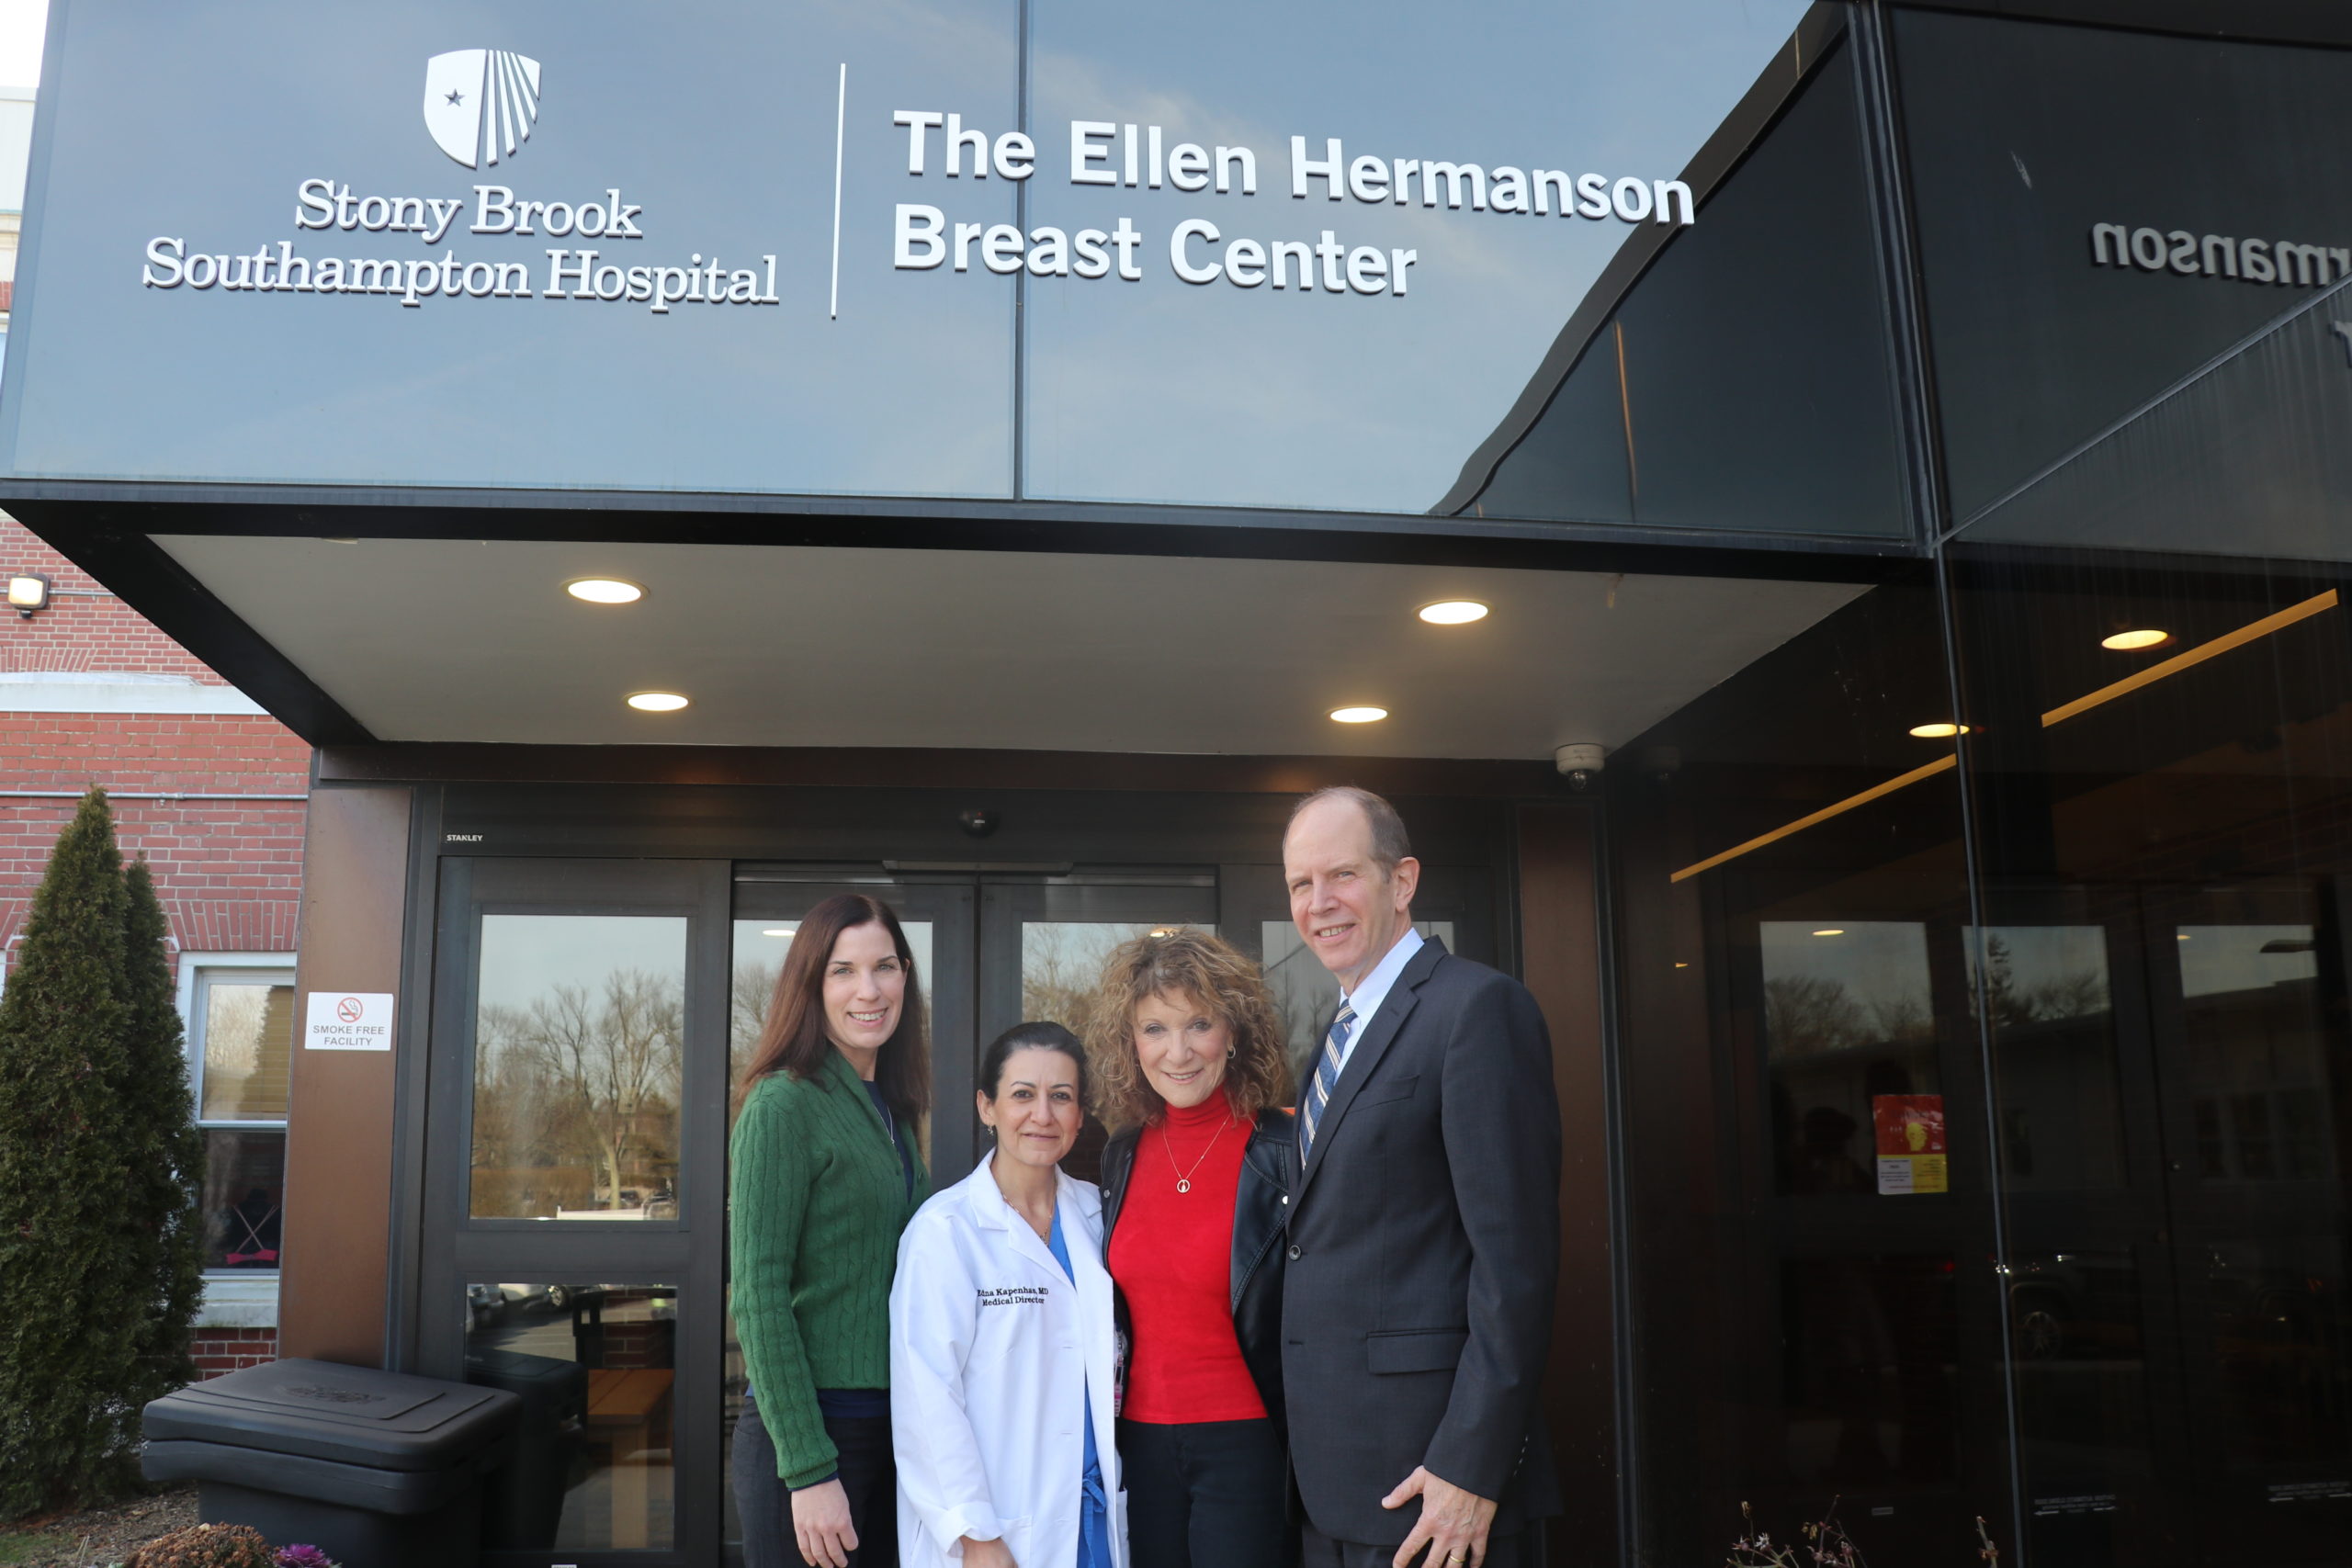 The Ellen Hermanson Foundation recently announced that during 2019, it has awarded $326,000 in grants to Stony Brook Southampton Hospital. From left, Anne Tschida Gomberg, executive director, The Ellen Hermanson Foundation; Edna Kapenhas, MD, director of Breast Surgery and medical director of The Ellen Hermanson Breast Center at Stony Brook Southampton Hospital; Julie Ratner, co-founder and chairwoman of The Ellen Hermanson Foundation; and Robert Chaloner, chief administrative officer, Stony Brook Southampton Hospital. 